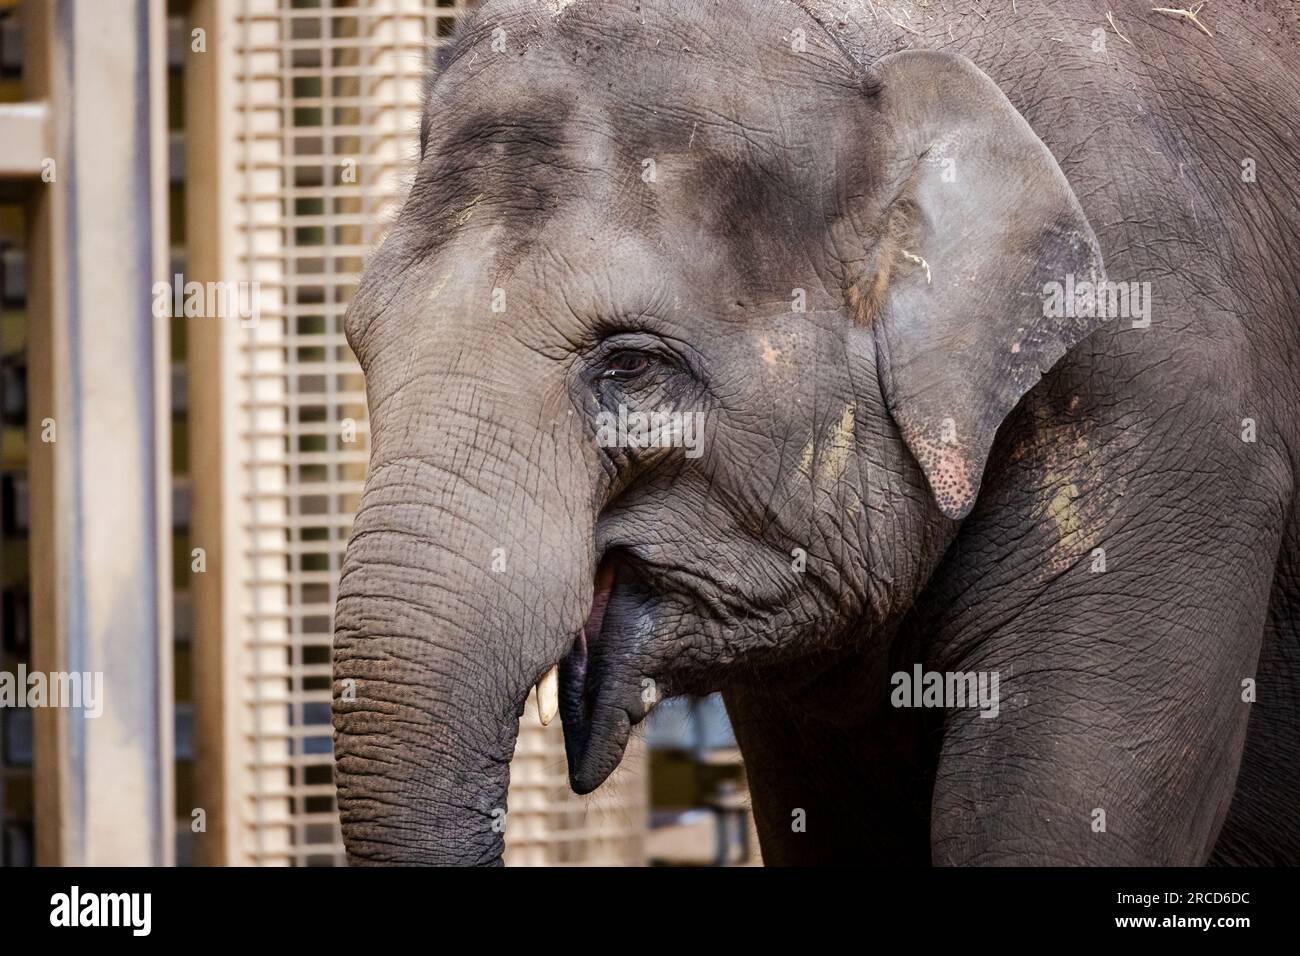 A closeup portrait of a grey elephant in a zoo in Belgium. The large mammal animal is looking happy and has an open mouth. Stock Photo